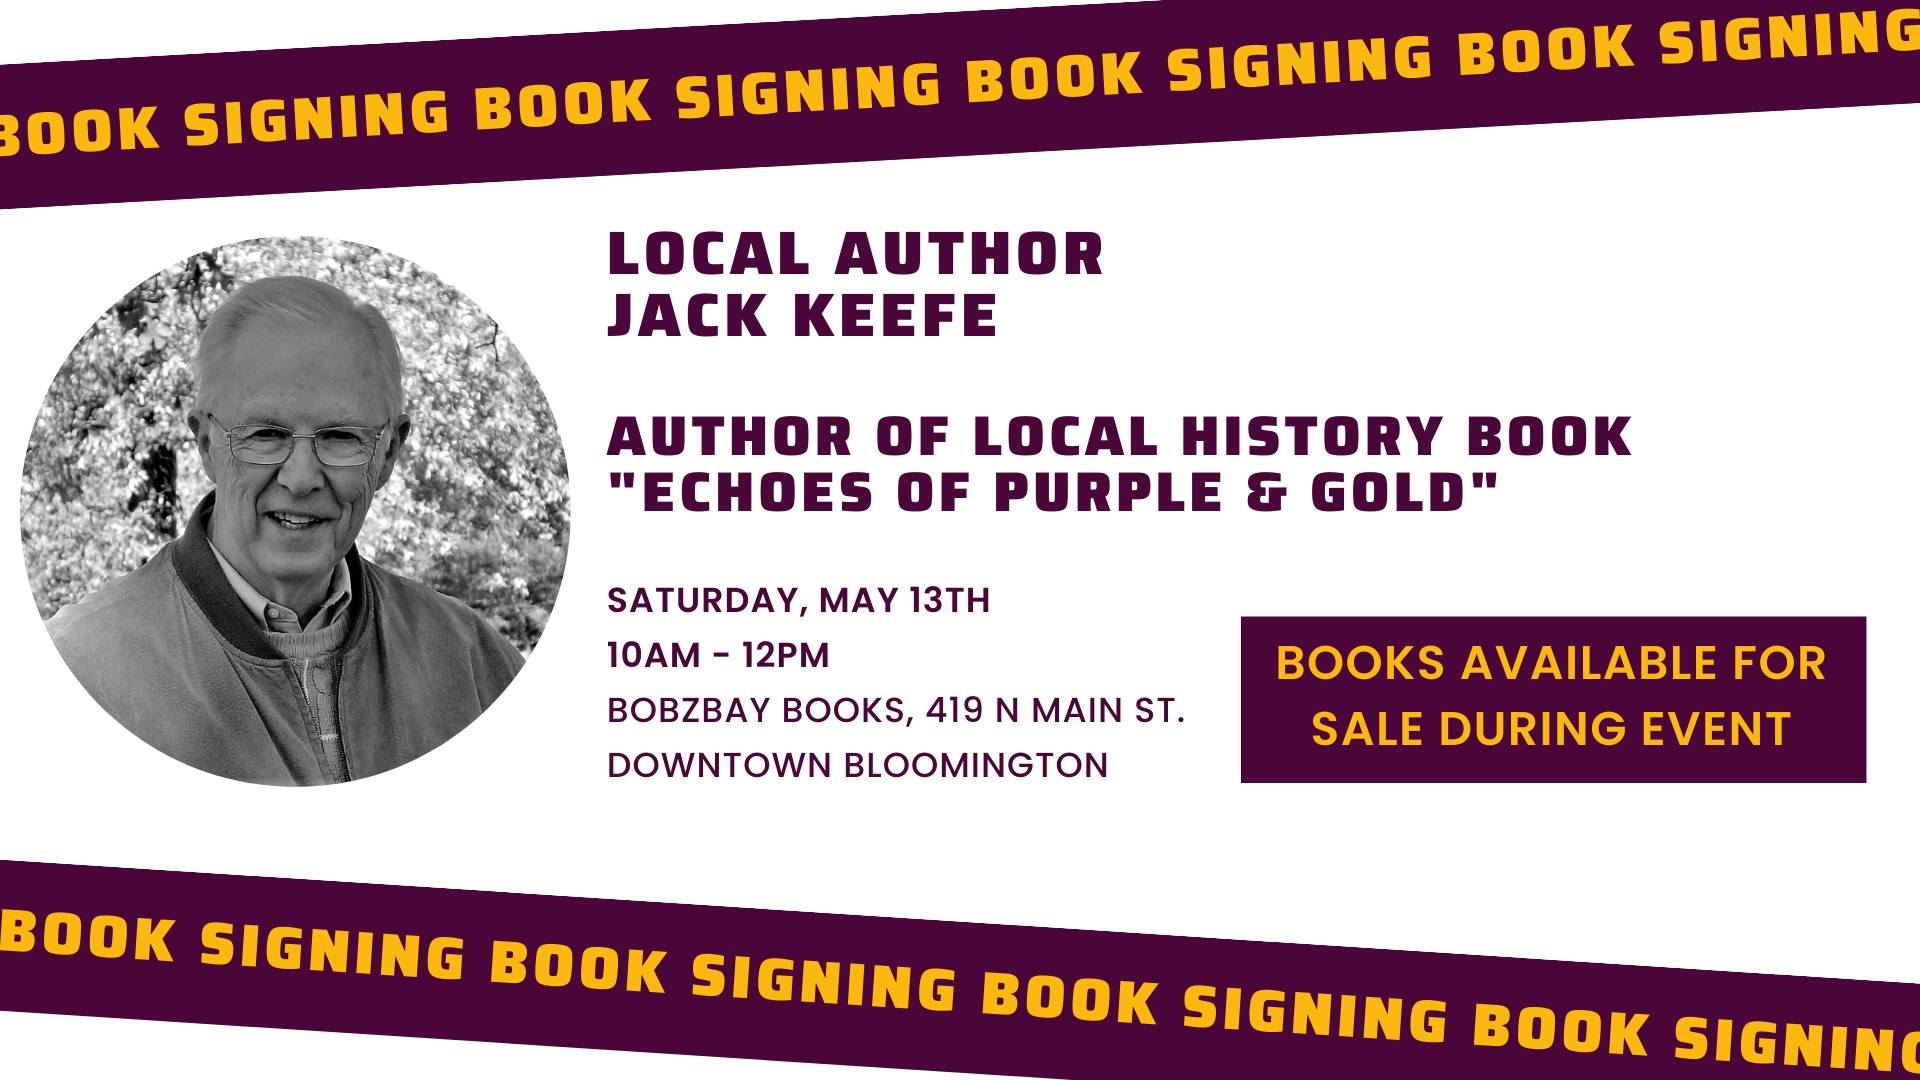 Local History Author Jack Keefe Book Signing at Bobzbay Books